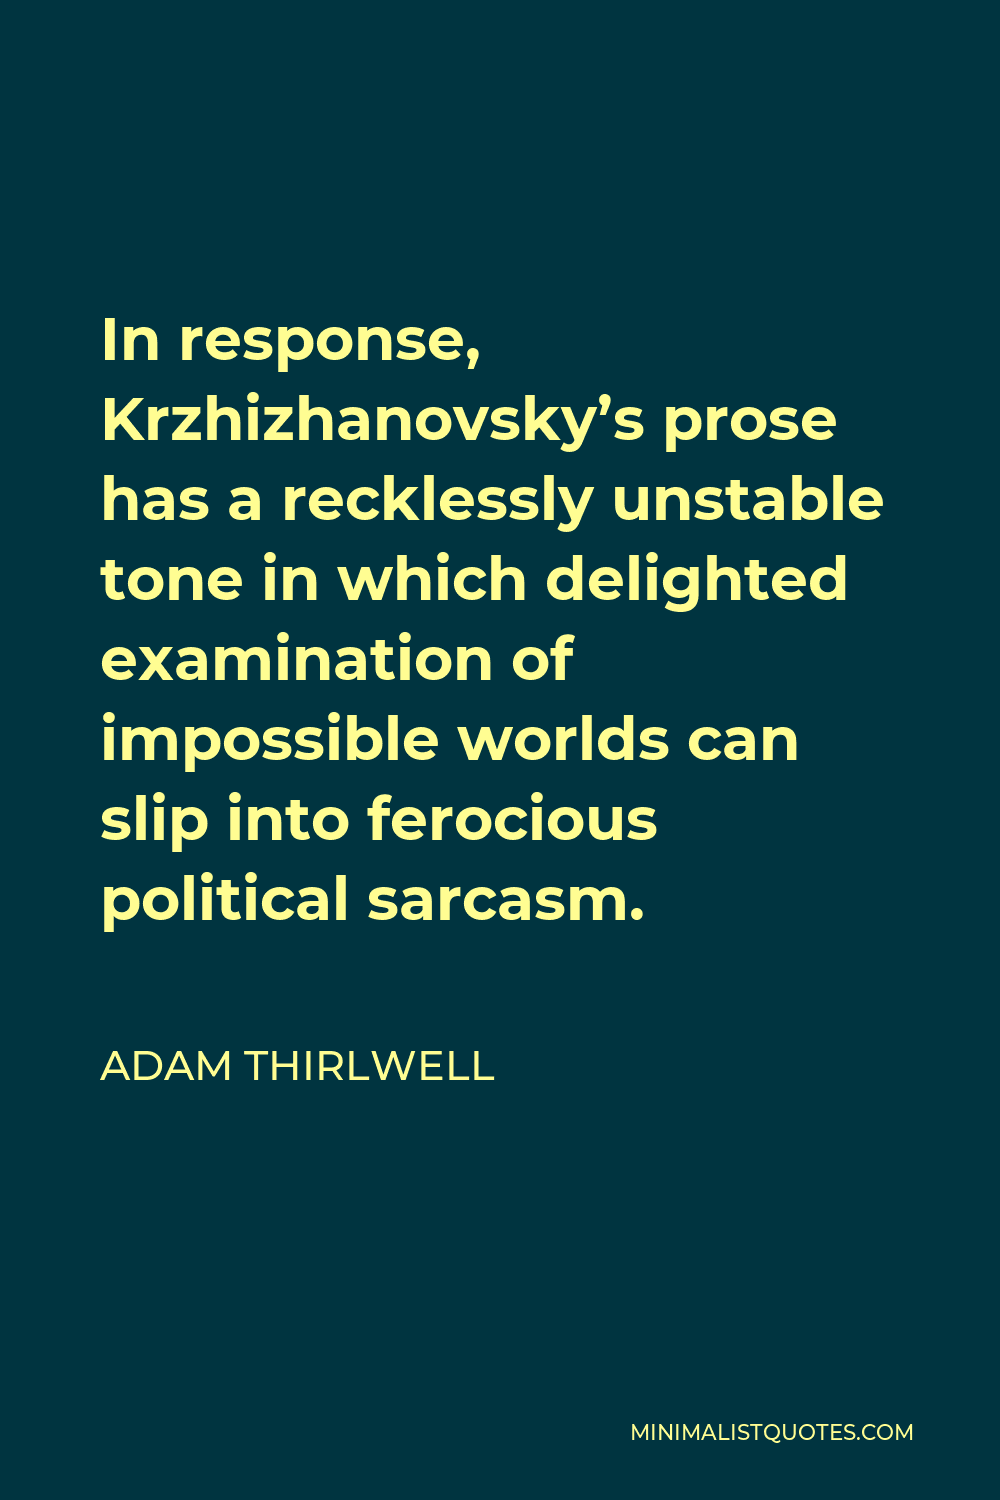 Adam Thirlwell Quote - In response, Krzhizhanovsky’s prose has a recklessly unstable tone in which delighted examination of impossible worlds can slip into ferocious political sarcasm.